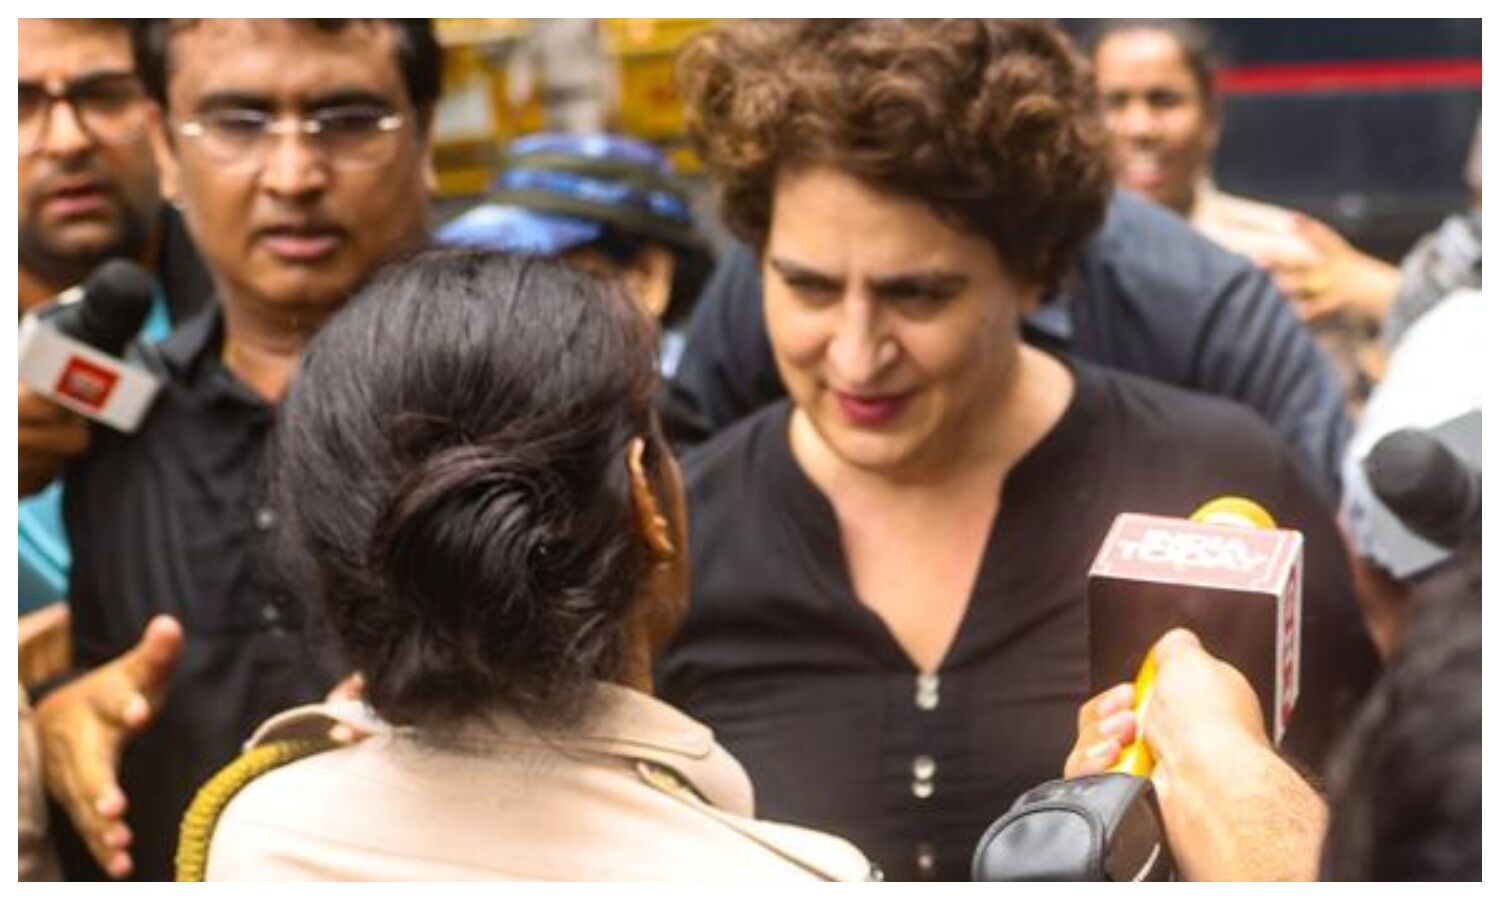 Congress Protest: Congress protests against the Centre, see in pictures how Priyanka Gandhi clashed with the police